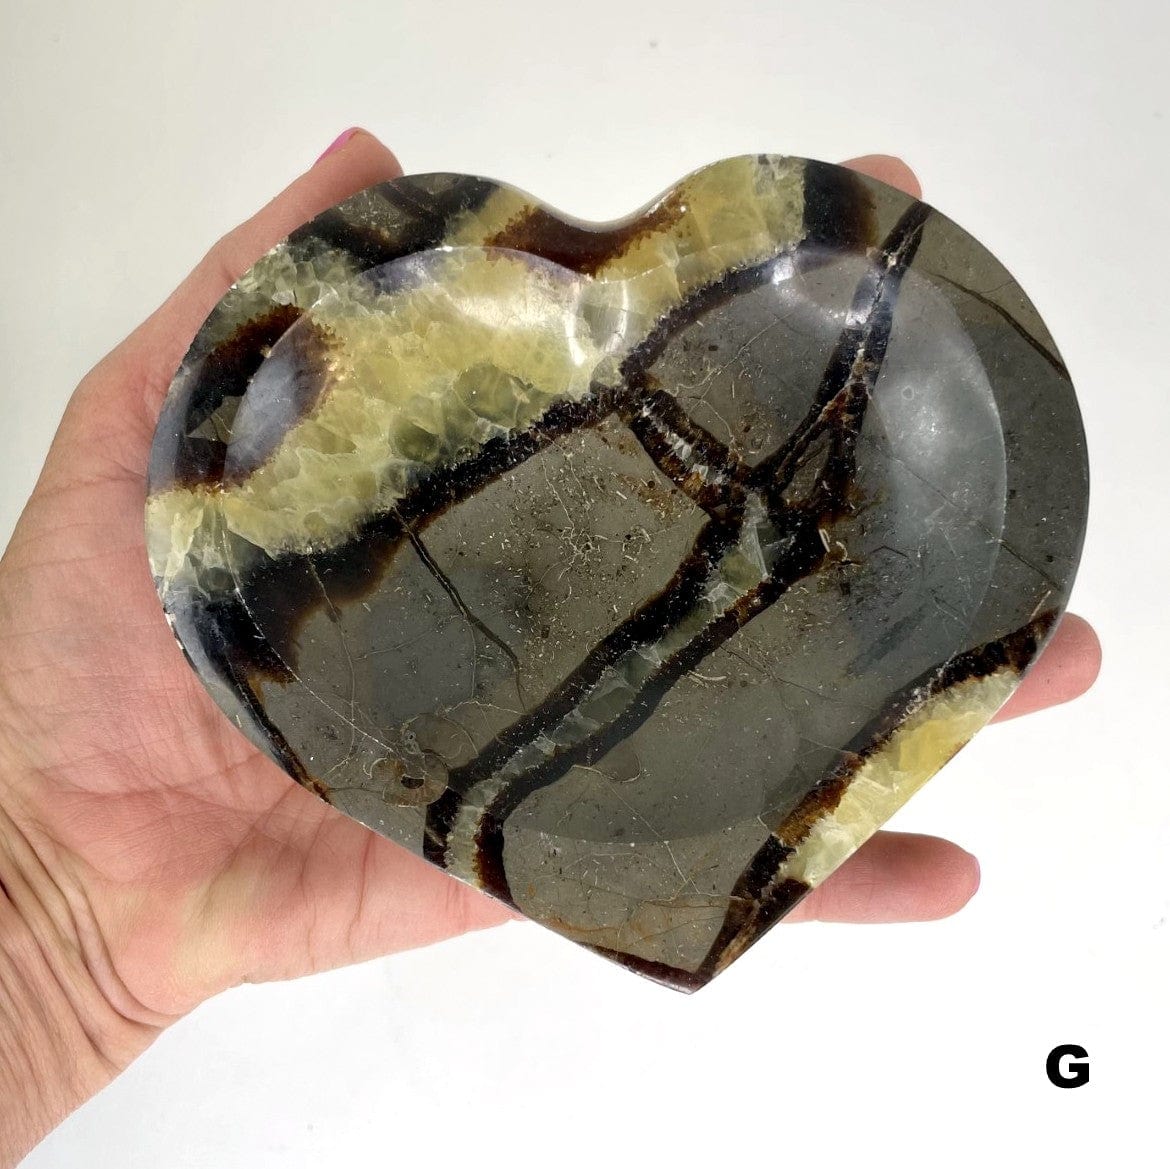 Septarian Heart Bowl - Polished Stone Dish #G in hand for size reference and formation differences